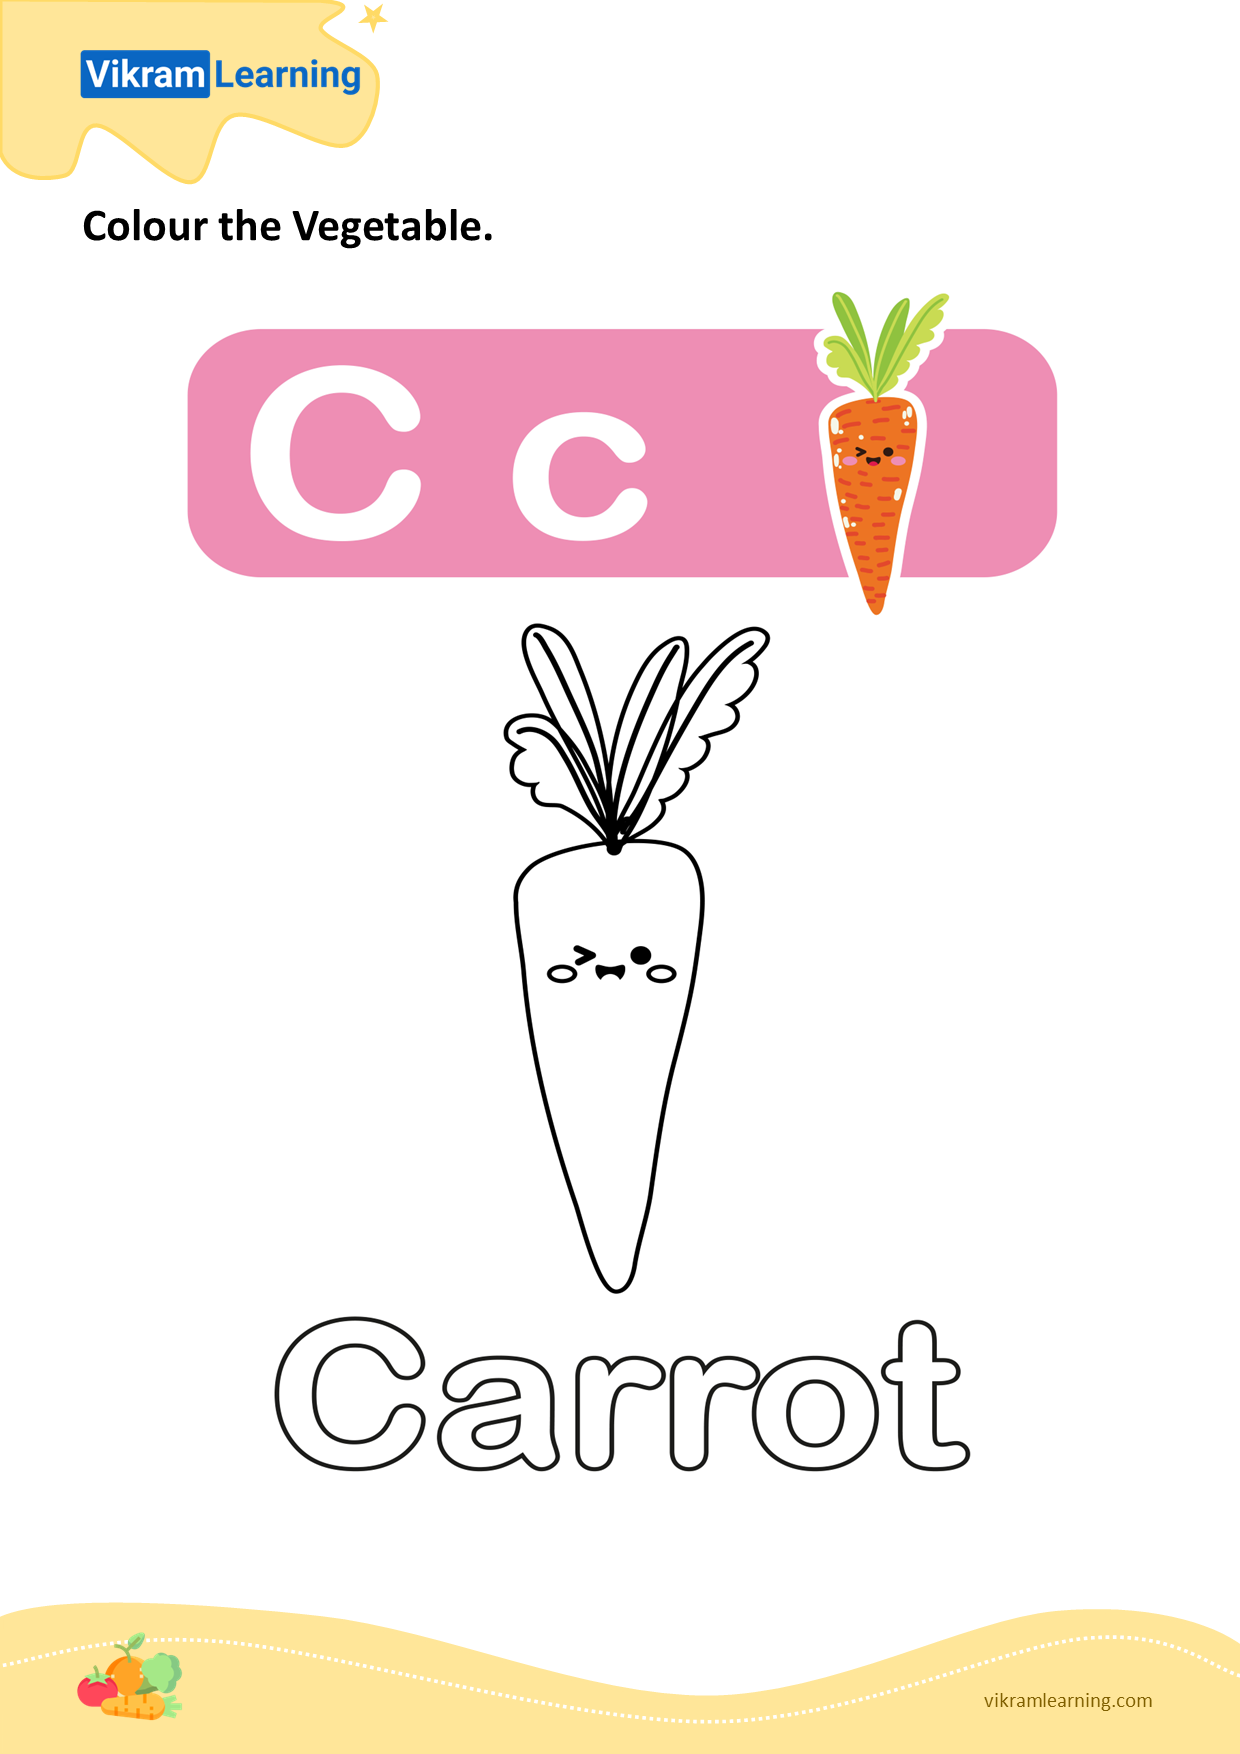 Download colour the vegetable - carrot worksheets